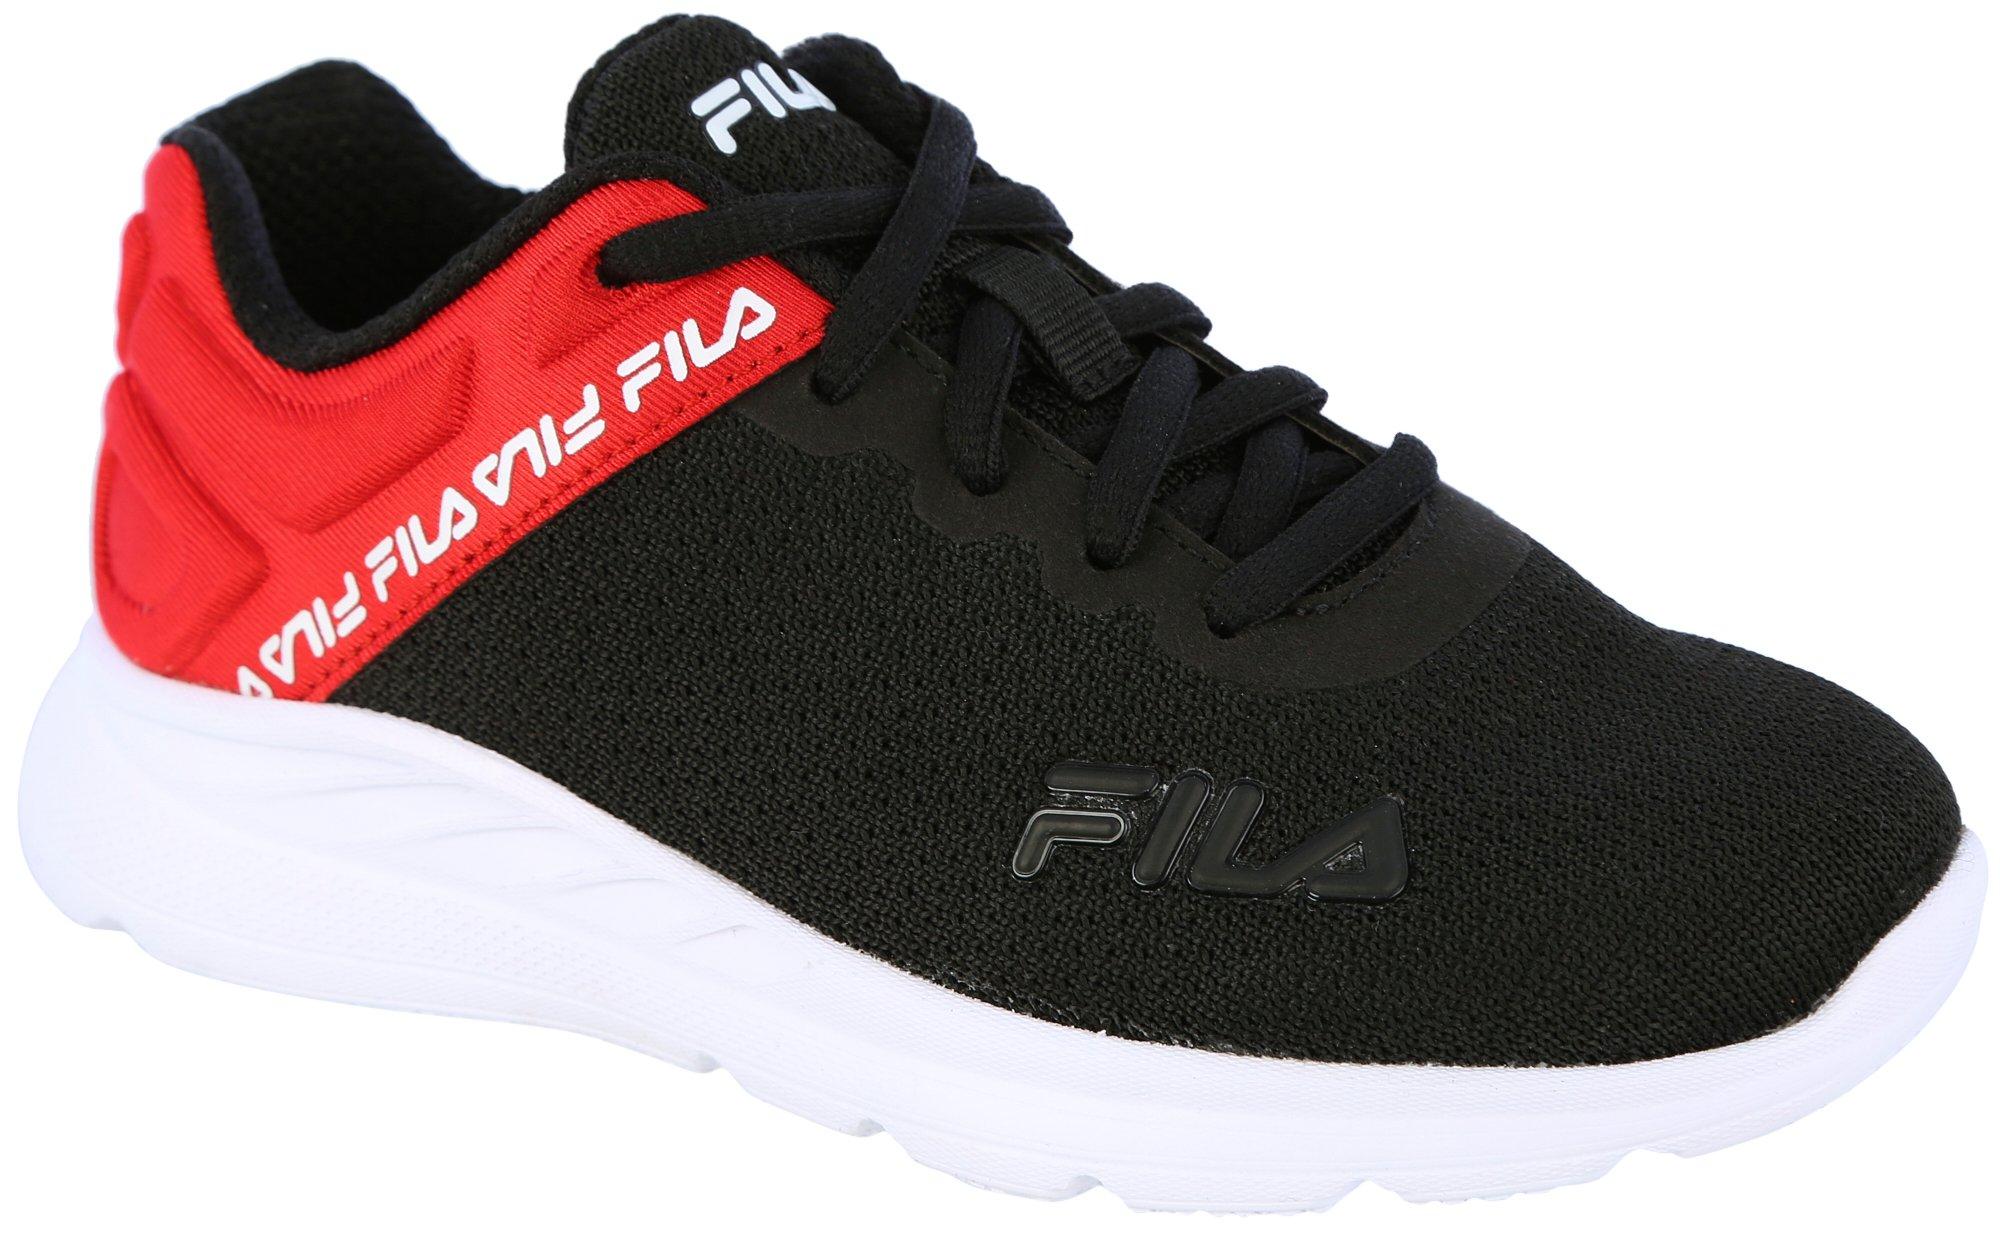 Boys Lightspin Athletic Shoes